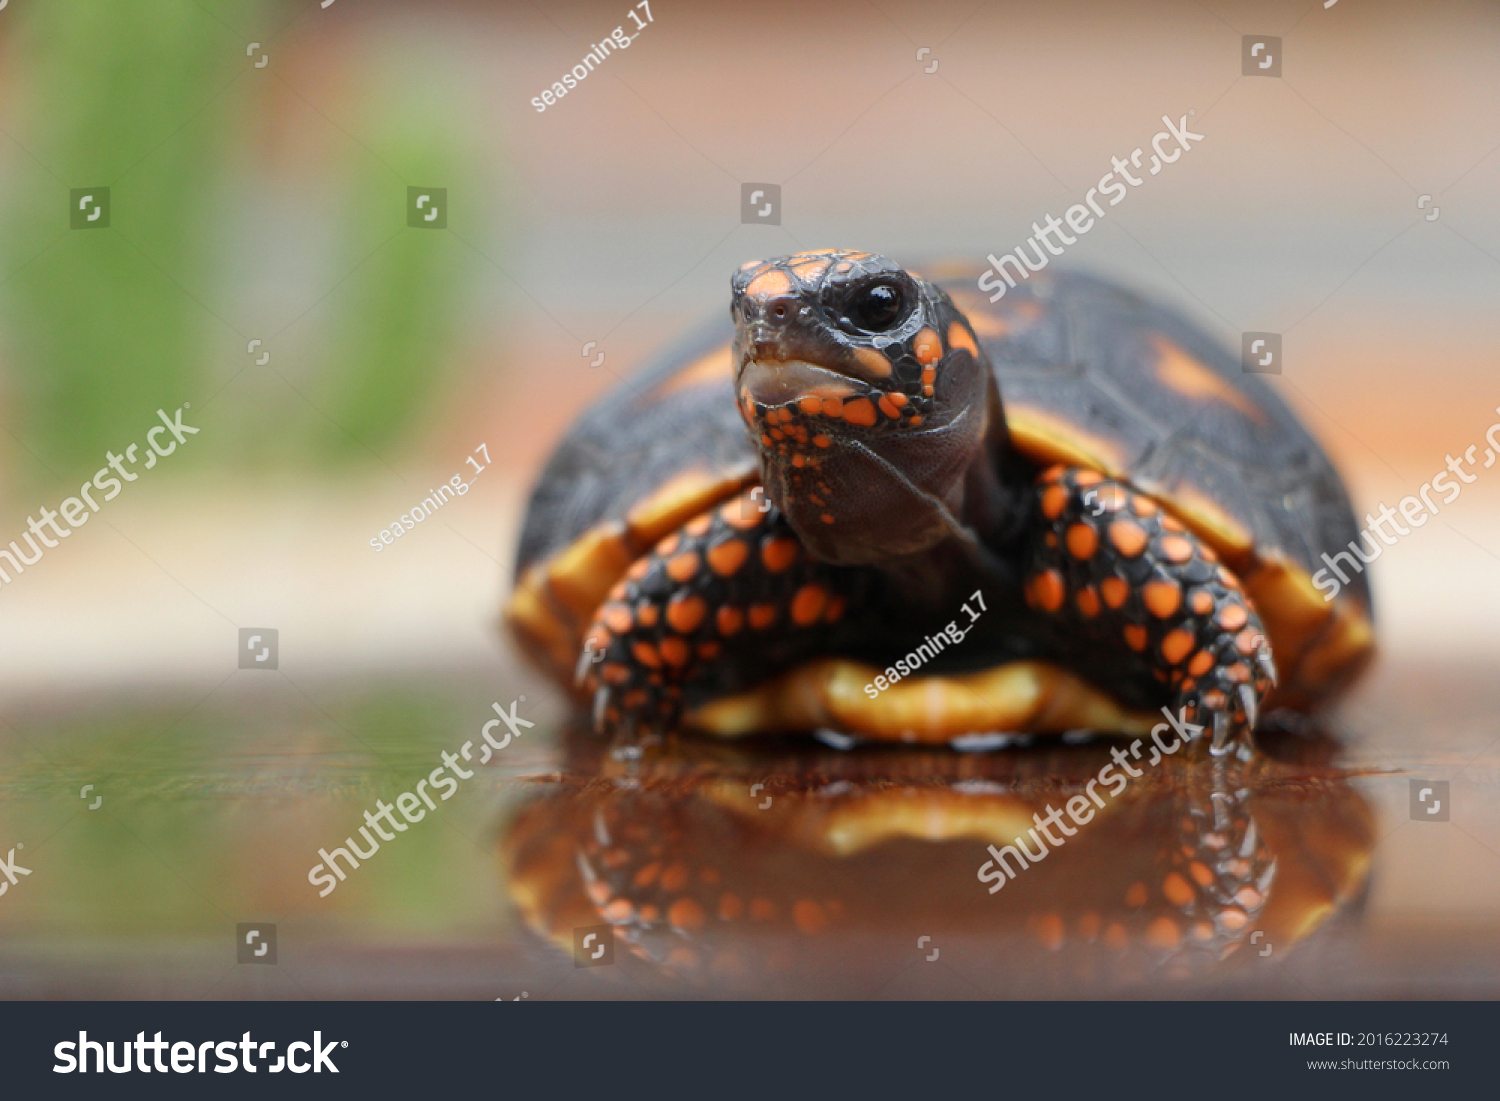 Cute small baby Red-foot Tortoise in the nature,The red-footed tortoise (Chelonoidis carbonarius) is a species of tortoise from northern South America #2016223274